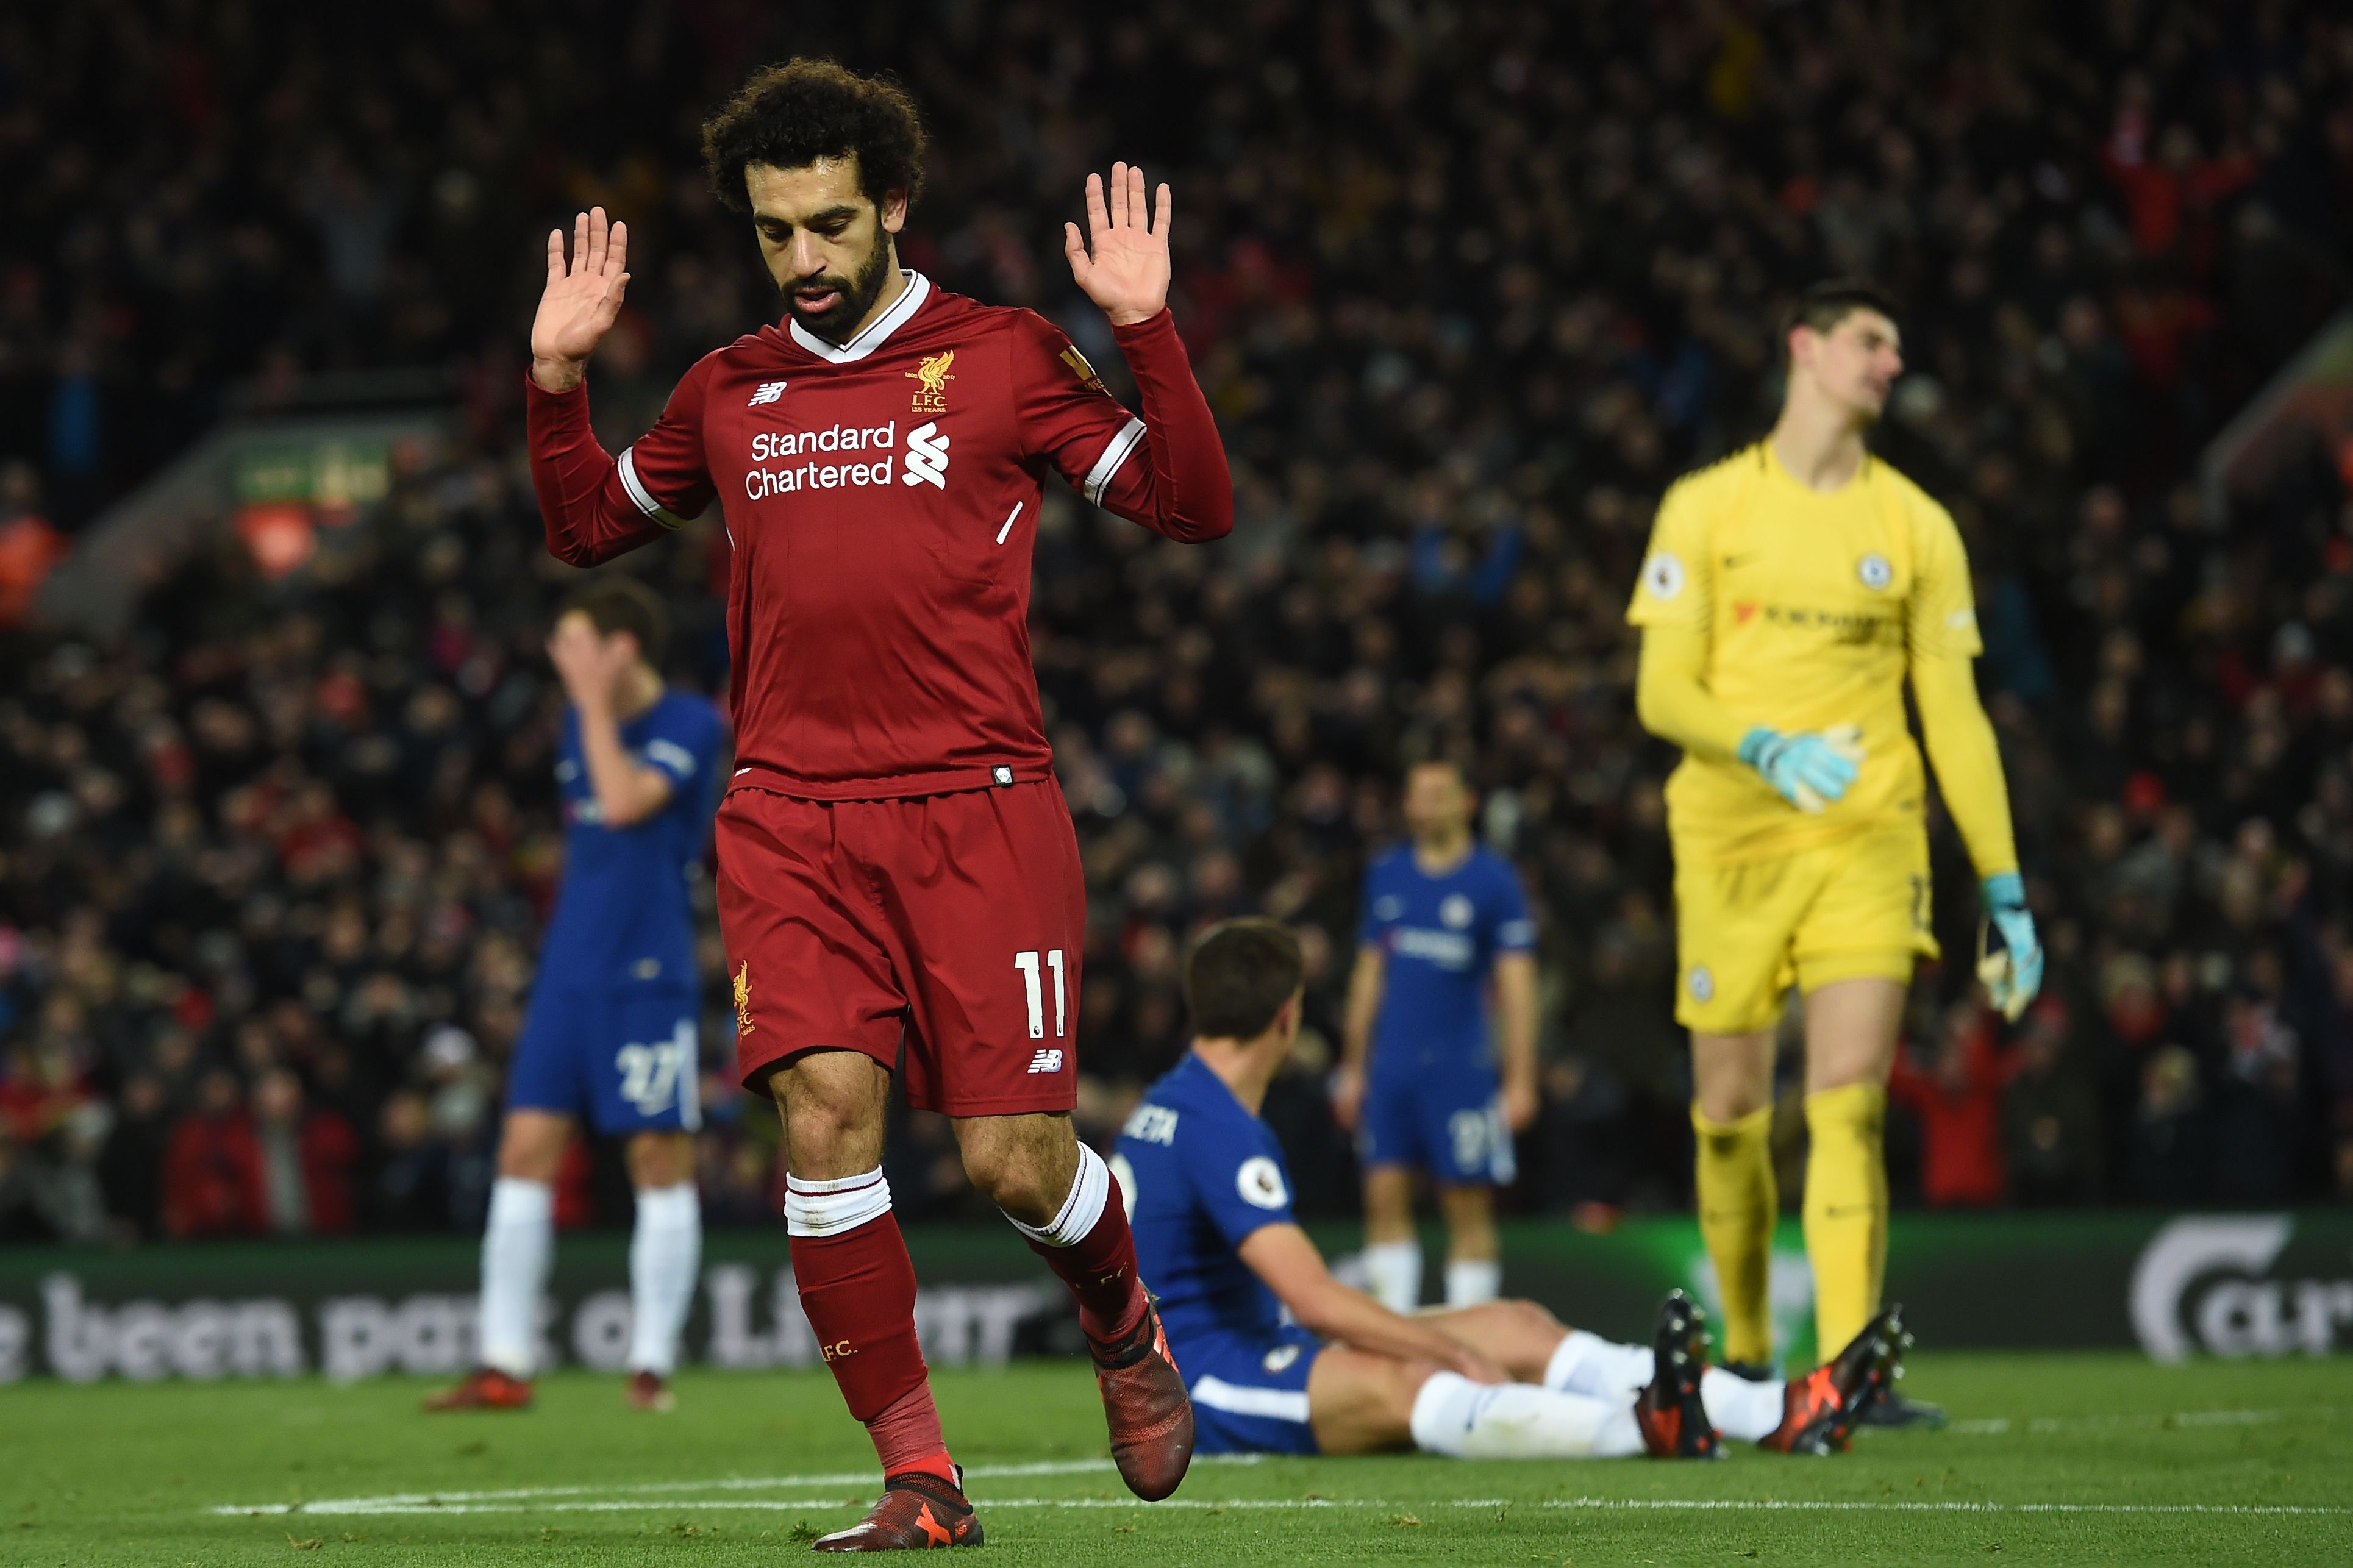 Liverpool's Egyptian midfielder Mohamed Salah (L) reacts after scoring the opening goal of the English Premier League football match between Liverpool and  Chelsea at Anfield in Liverpool, north west England on November 25, 2017.
The game finished 1-1. / AFP PHOTO / Paul ELLIS / RESTRICTED TO EDITORIAL USE. No use with unauthorized audio, video, data, fixture lists, club/league logos or 'live' services. Online in-match use limited to 75 images, no video emulation. No use in betting, games or single club/league/player publications.  /         (Photo credit should read PAUL ELLIS/AFP/Getty Images)